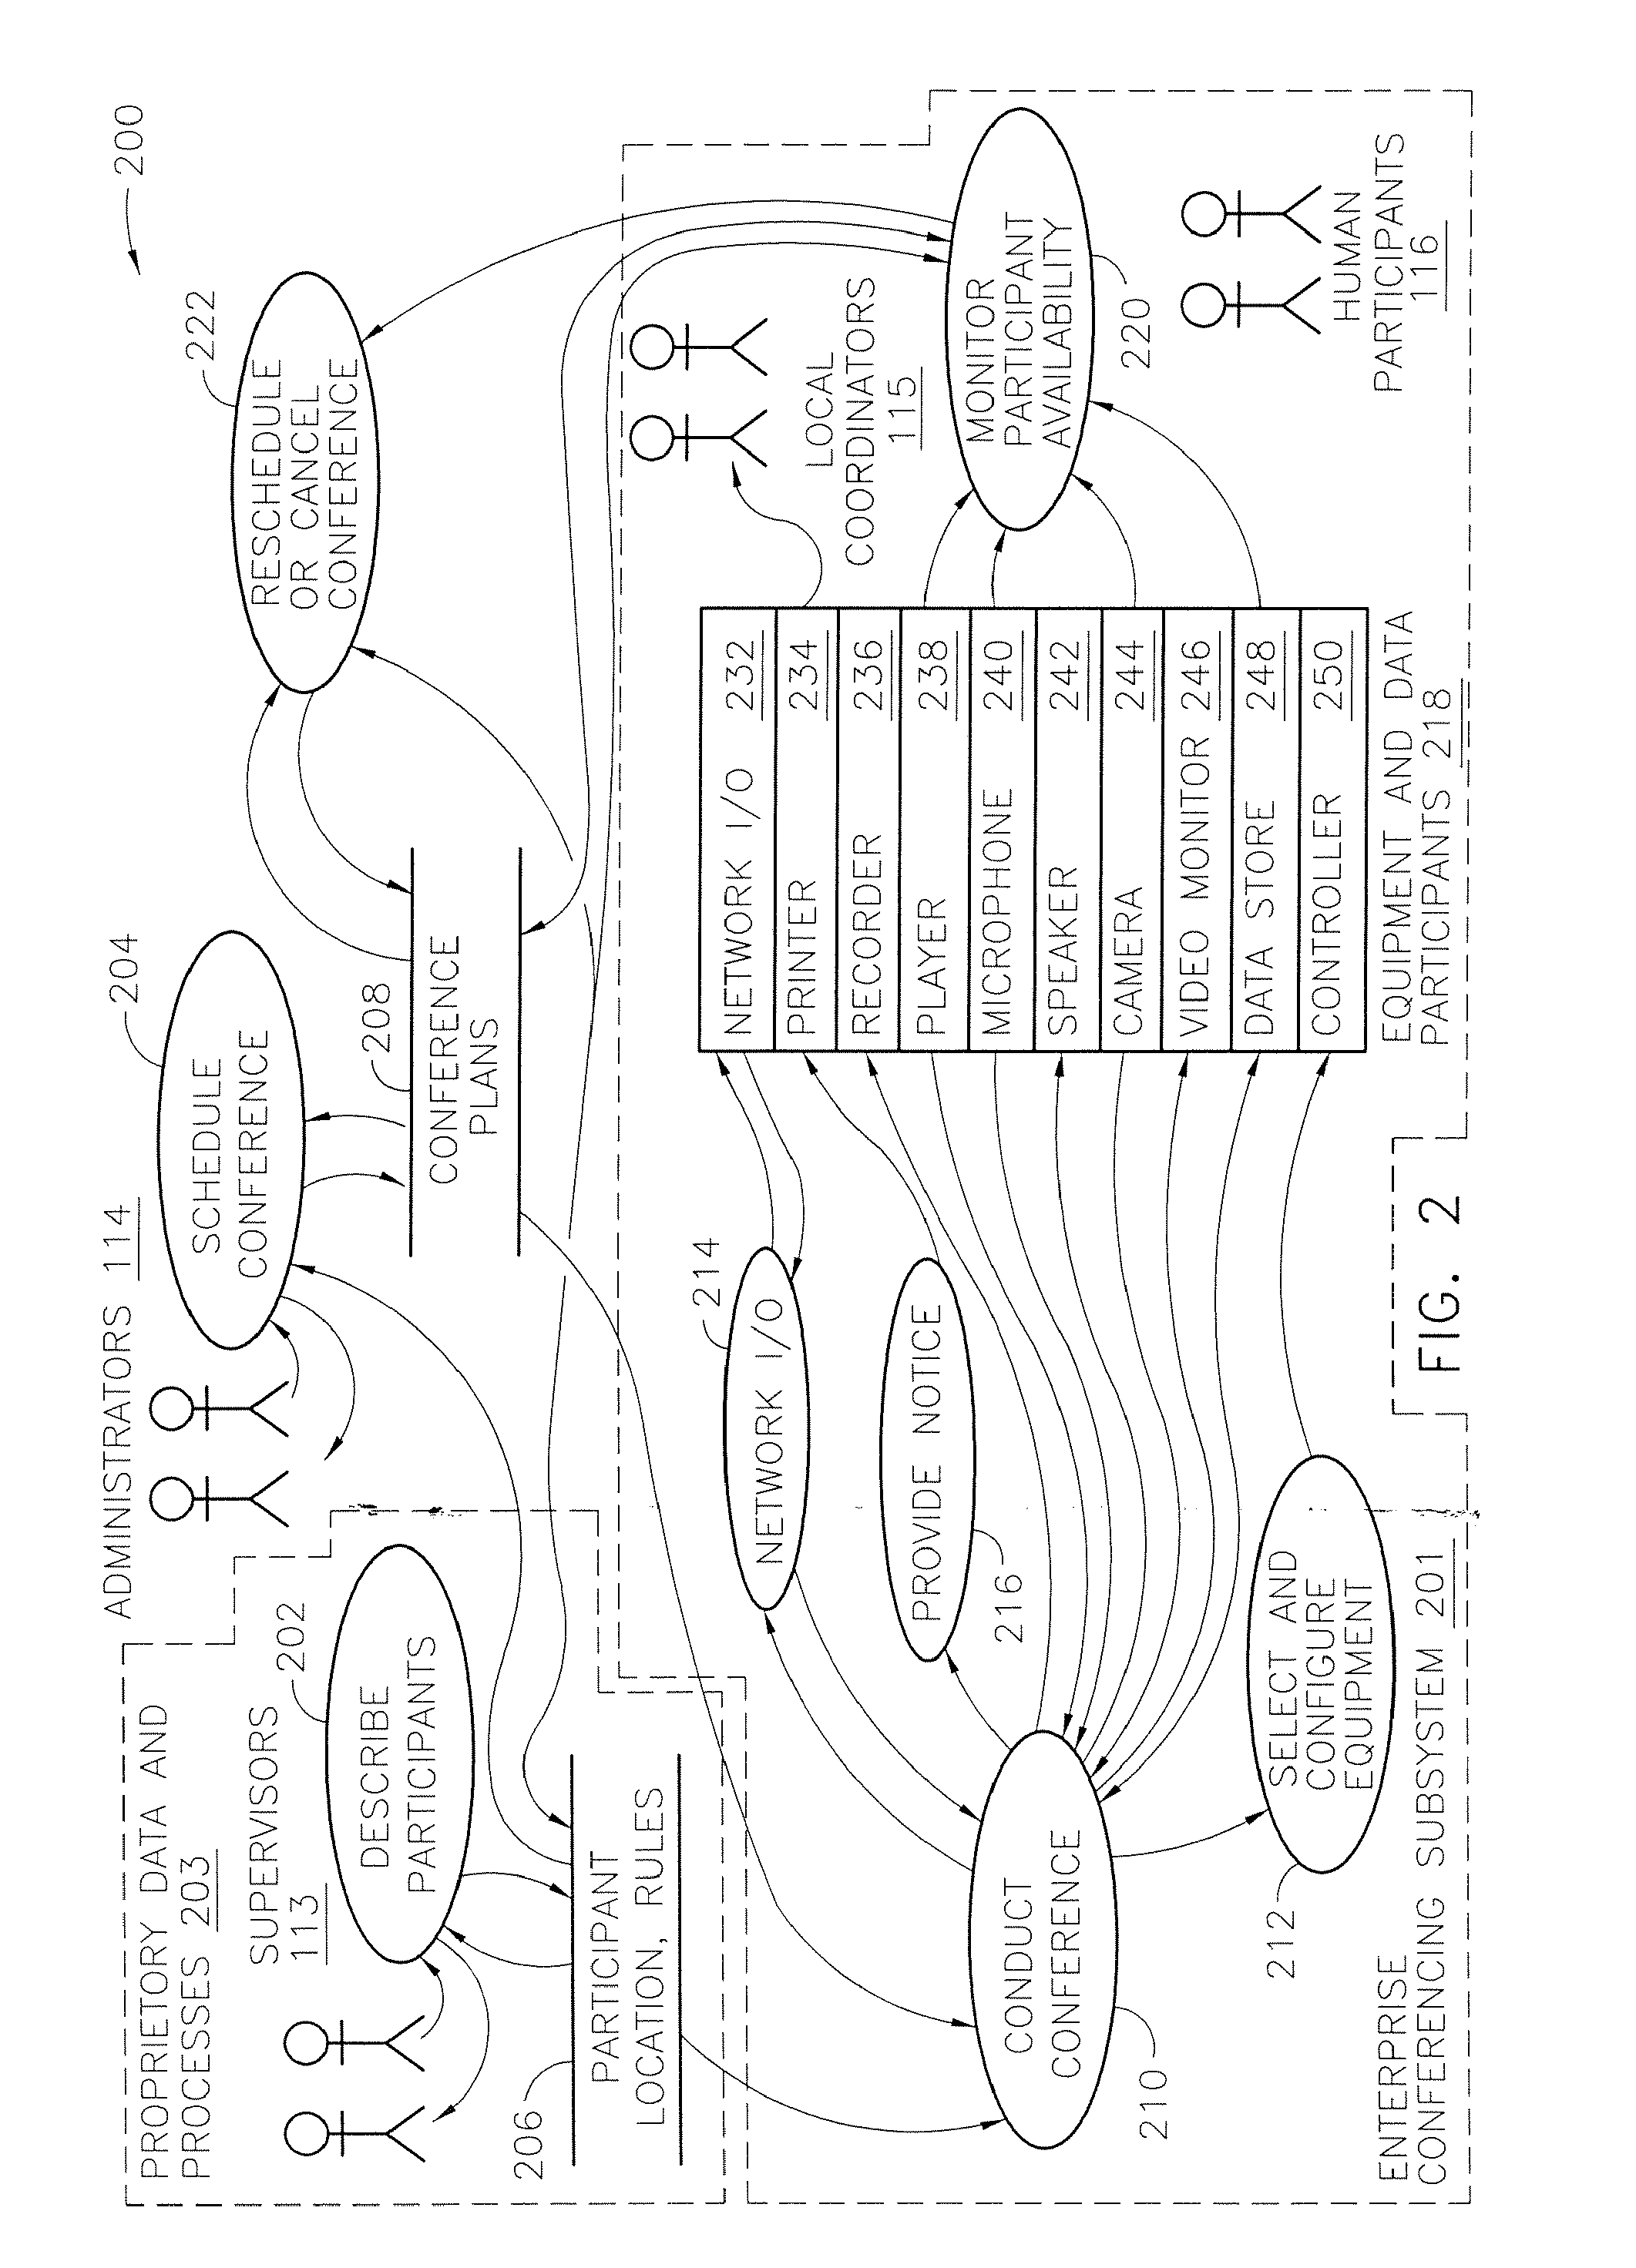 Systems and methods for conferencing among governed and external participants